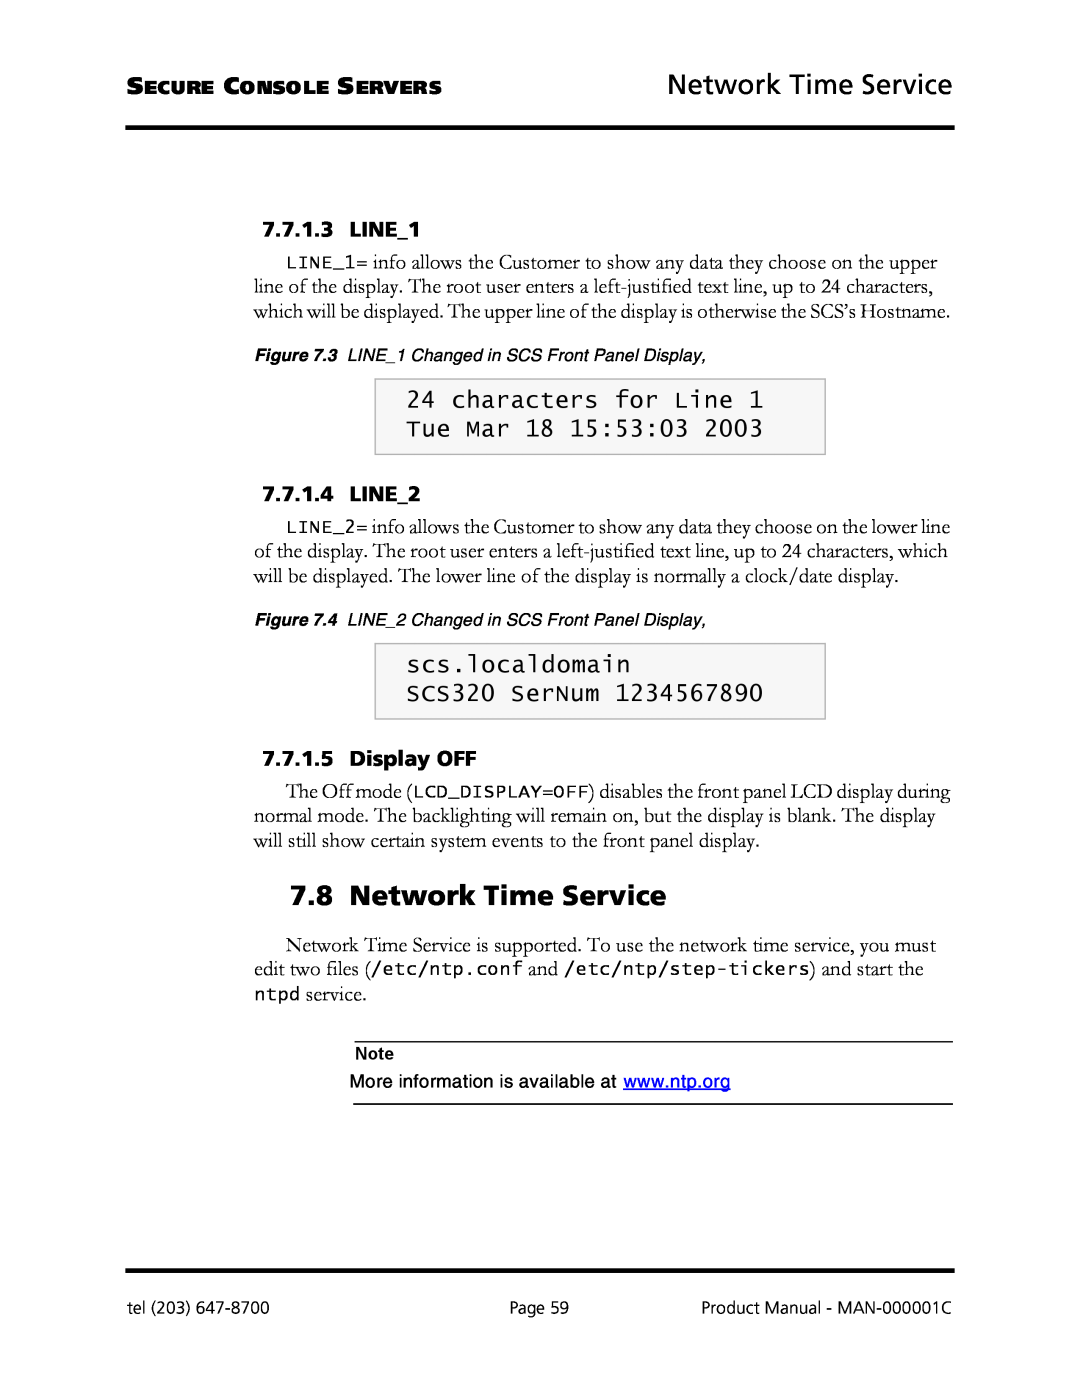 Logical Solutions Network Time Service, scs.localdomain SCS320 SerNum, characters for Line 1 Tue Mar 18 155303, LINE1 